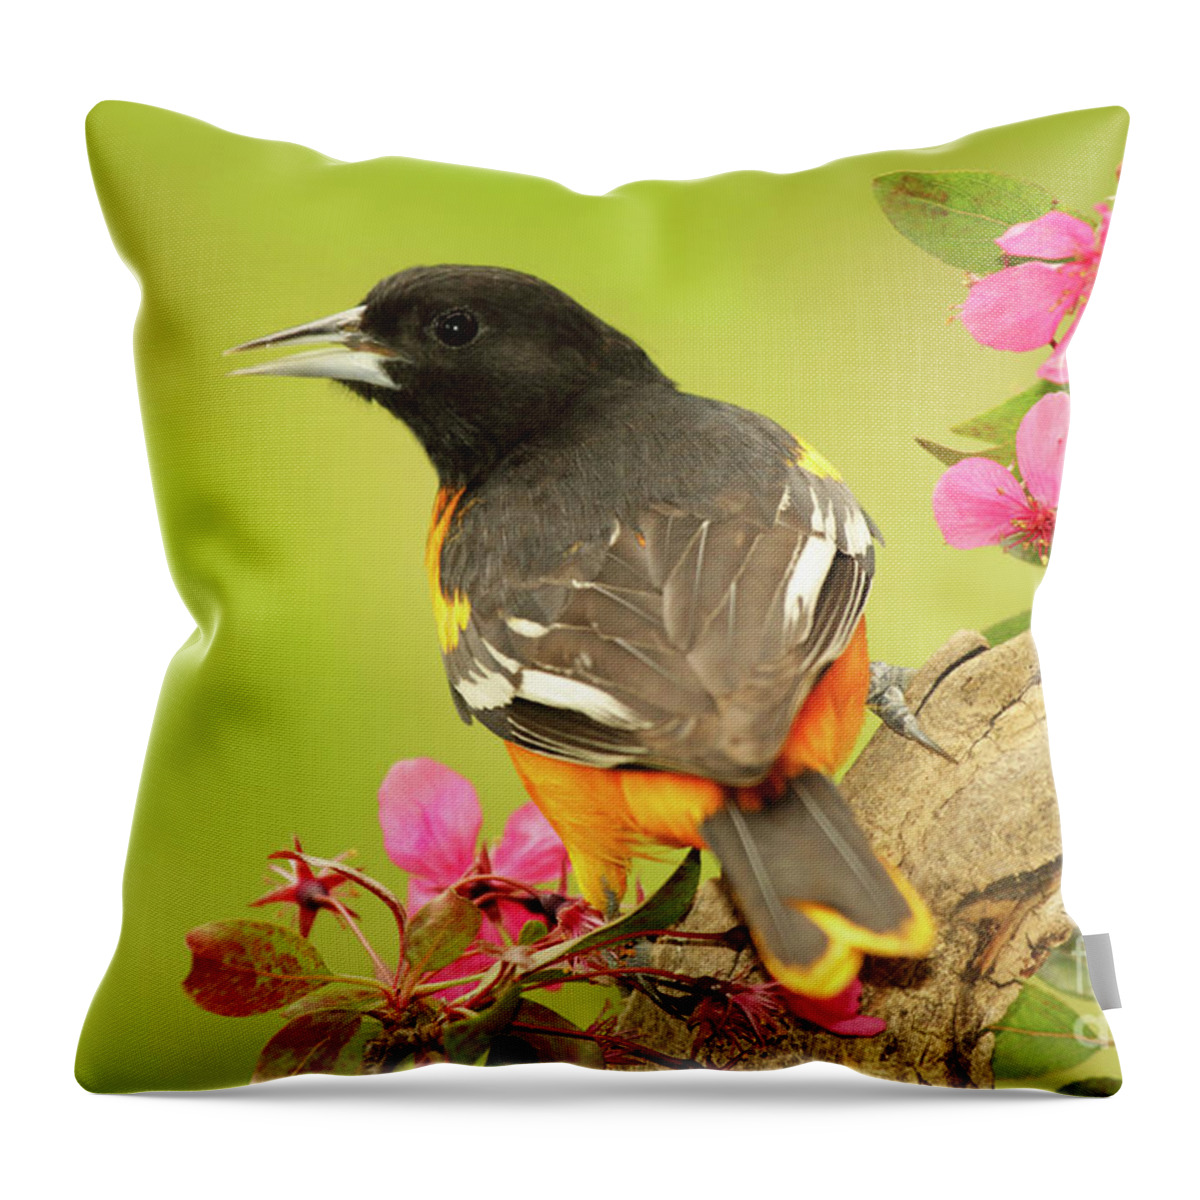 Autumn Throw Pillow featuring the photograph Baltimore Oriole Among Apple Blossoms by Max Allen